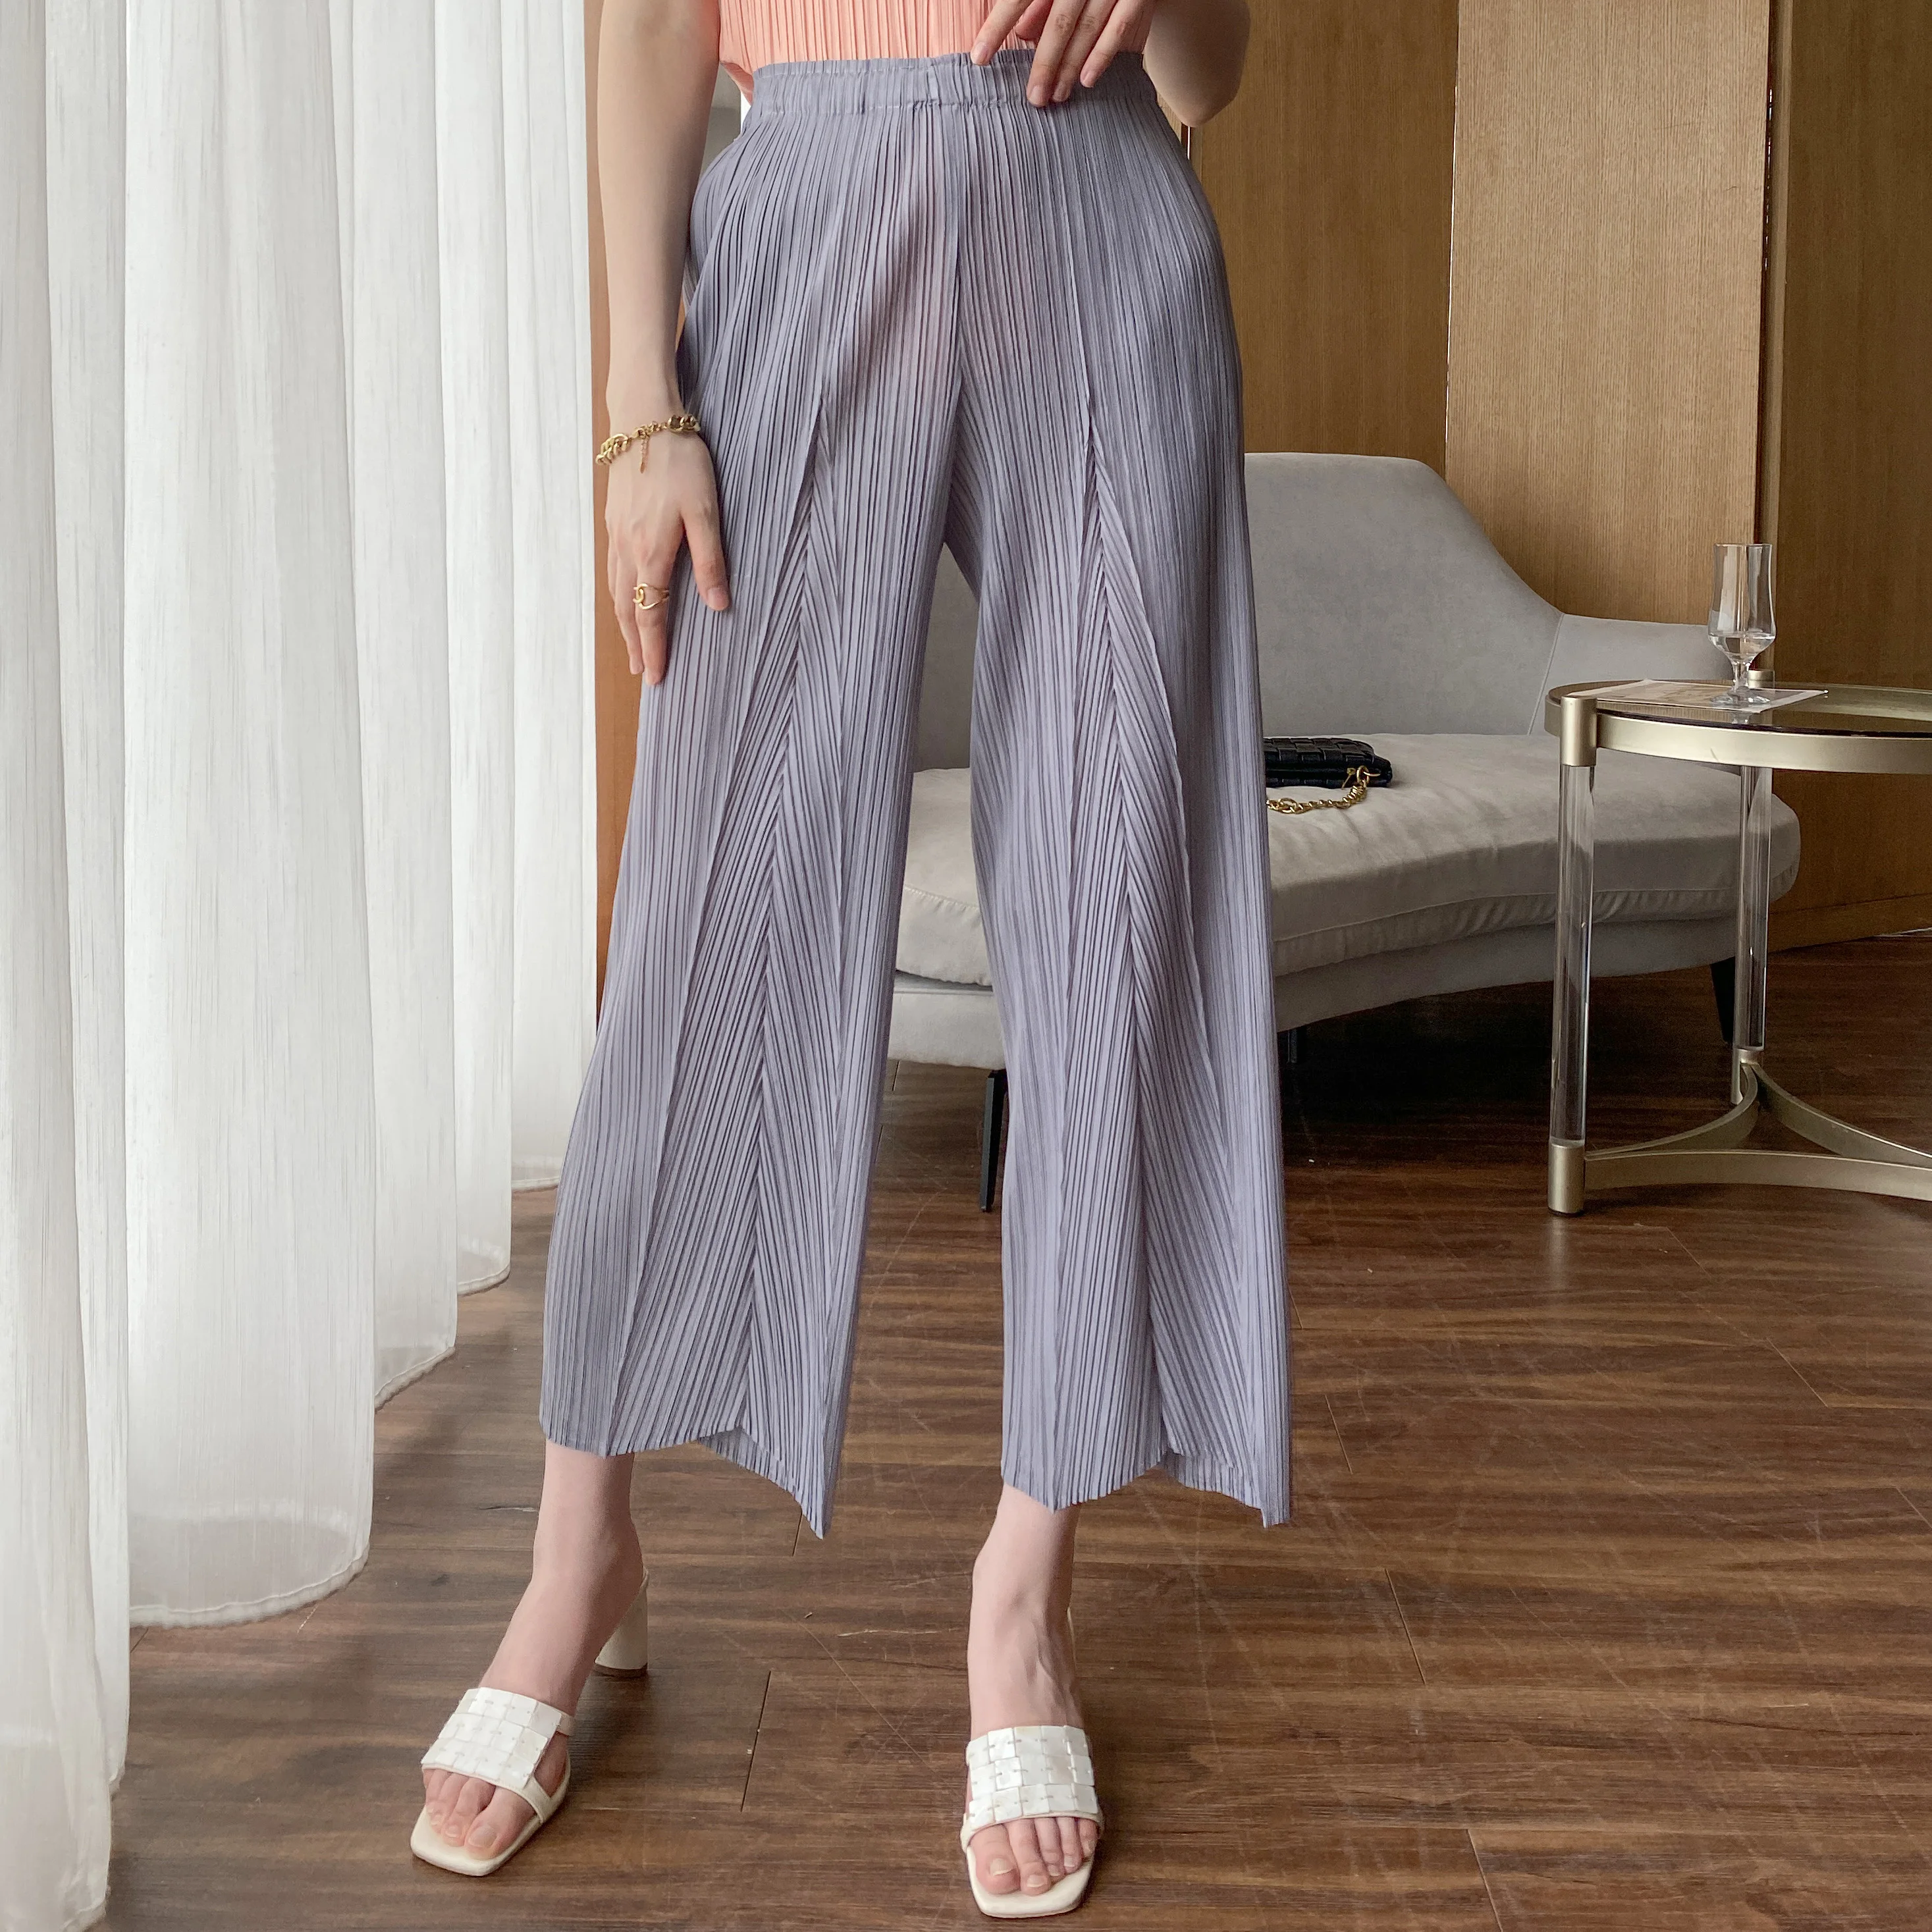 Autumn, spring and summer three seasons can wear Miyake pleated fashion temperament versatile casual fashion nine-minute pants women s jeans pear shaped body slightly fat wear big size women s nine minute straight pipe jeans 2023 autumn new